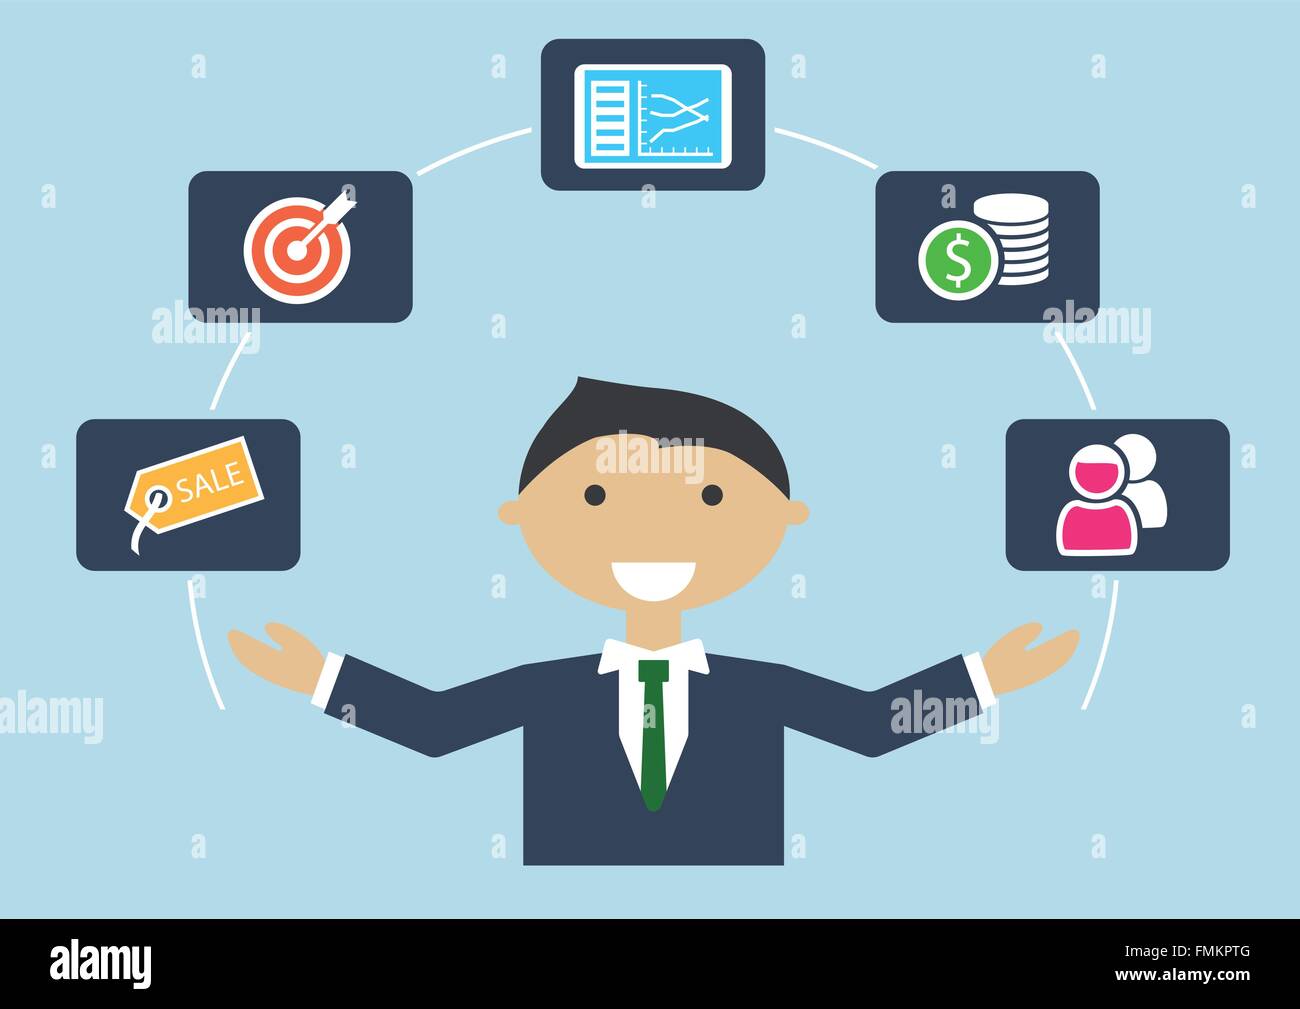 People at work: vector illustration of sales expert or sales manager Stock Vector